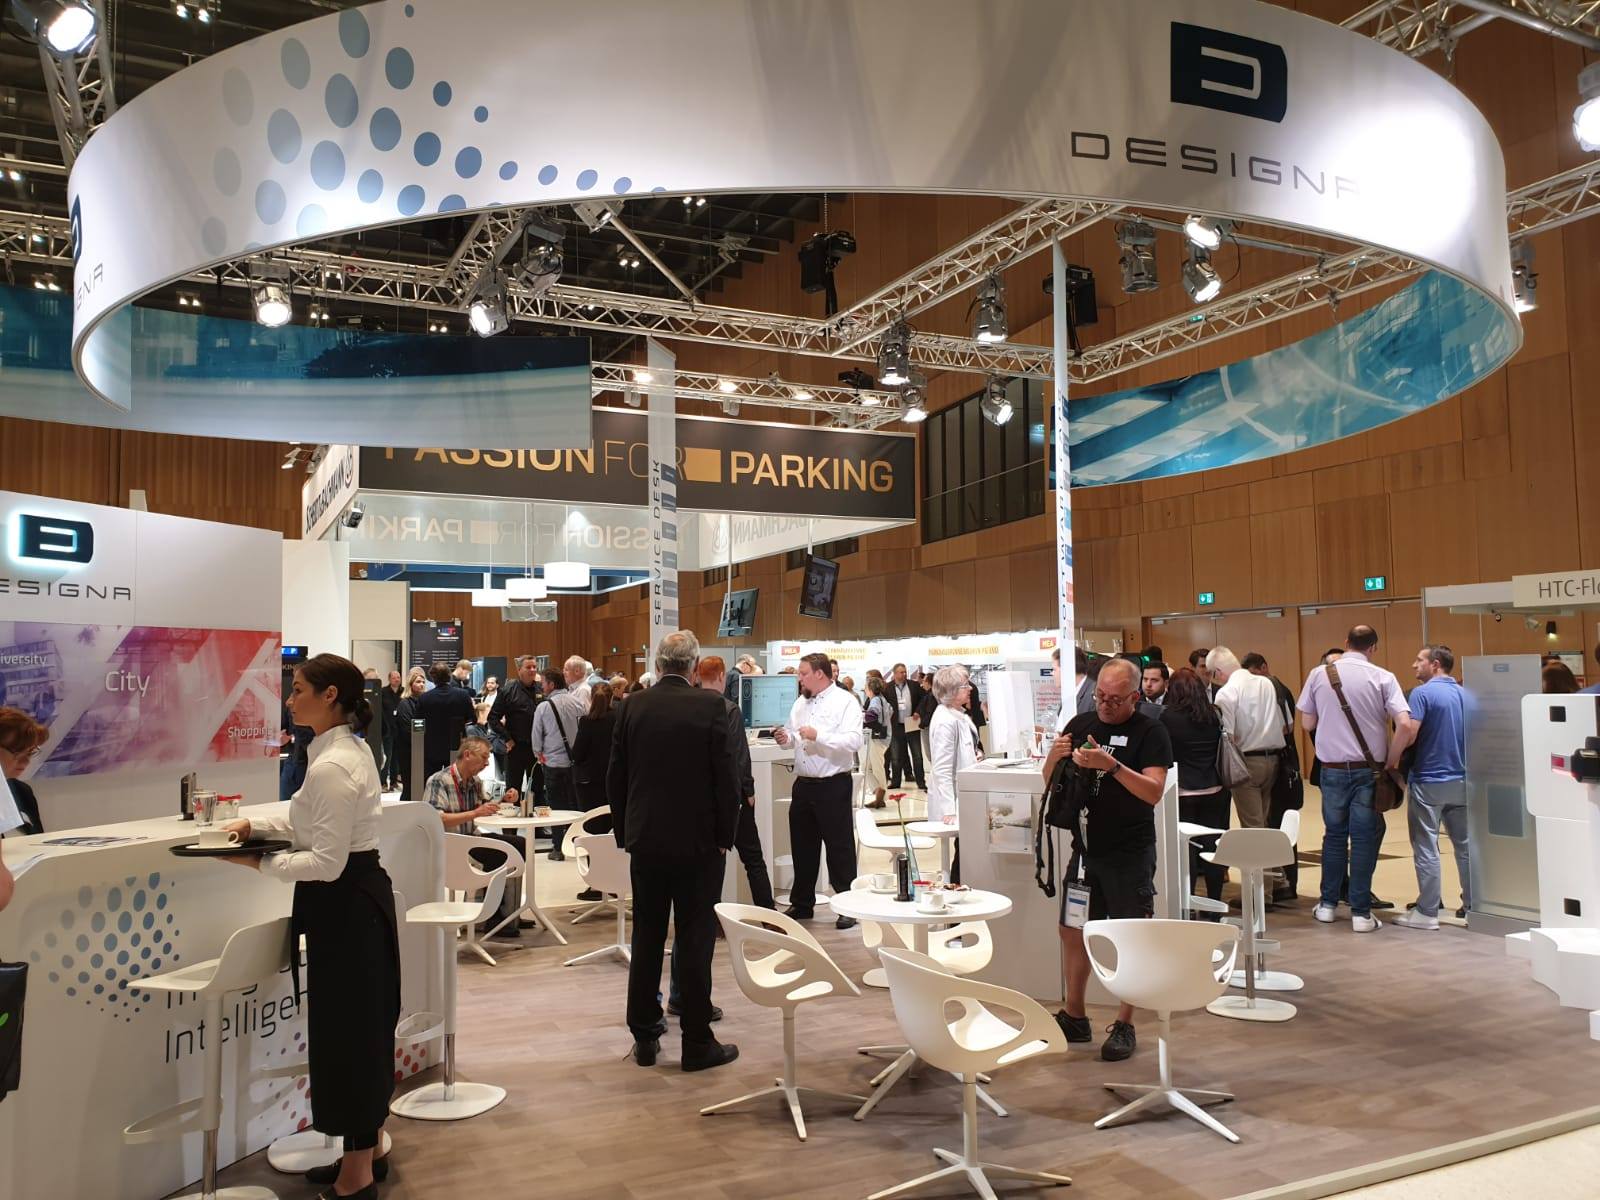 112 exhibitors and 1,602 trade visitors attended PARKEN 2019 